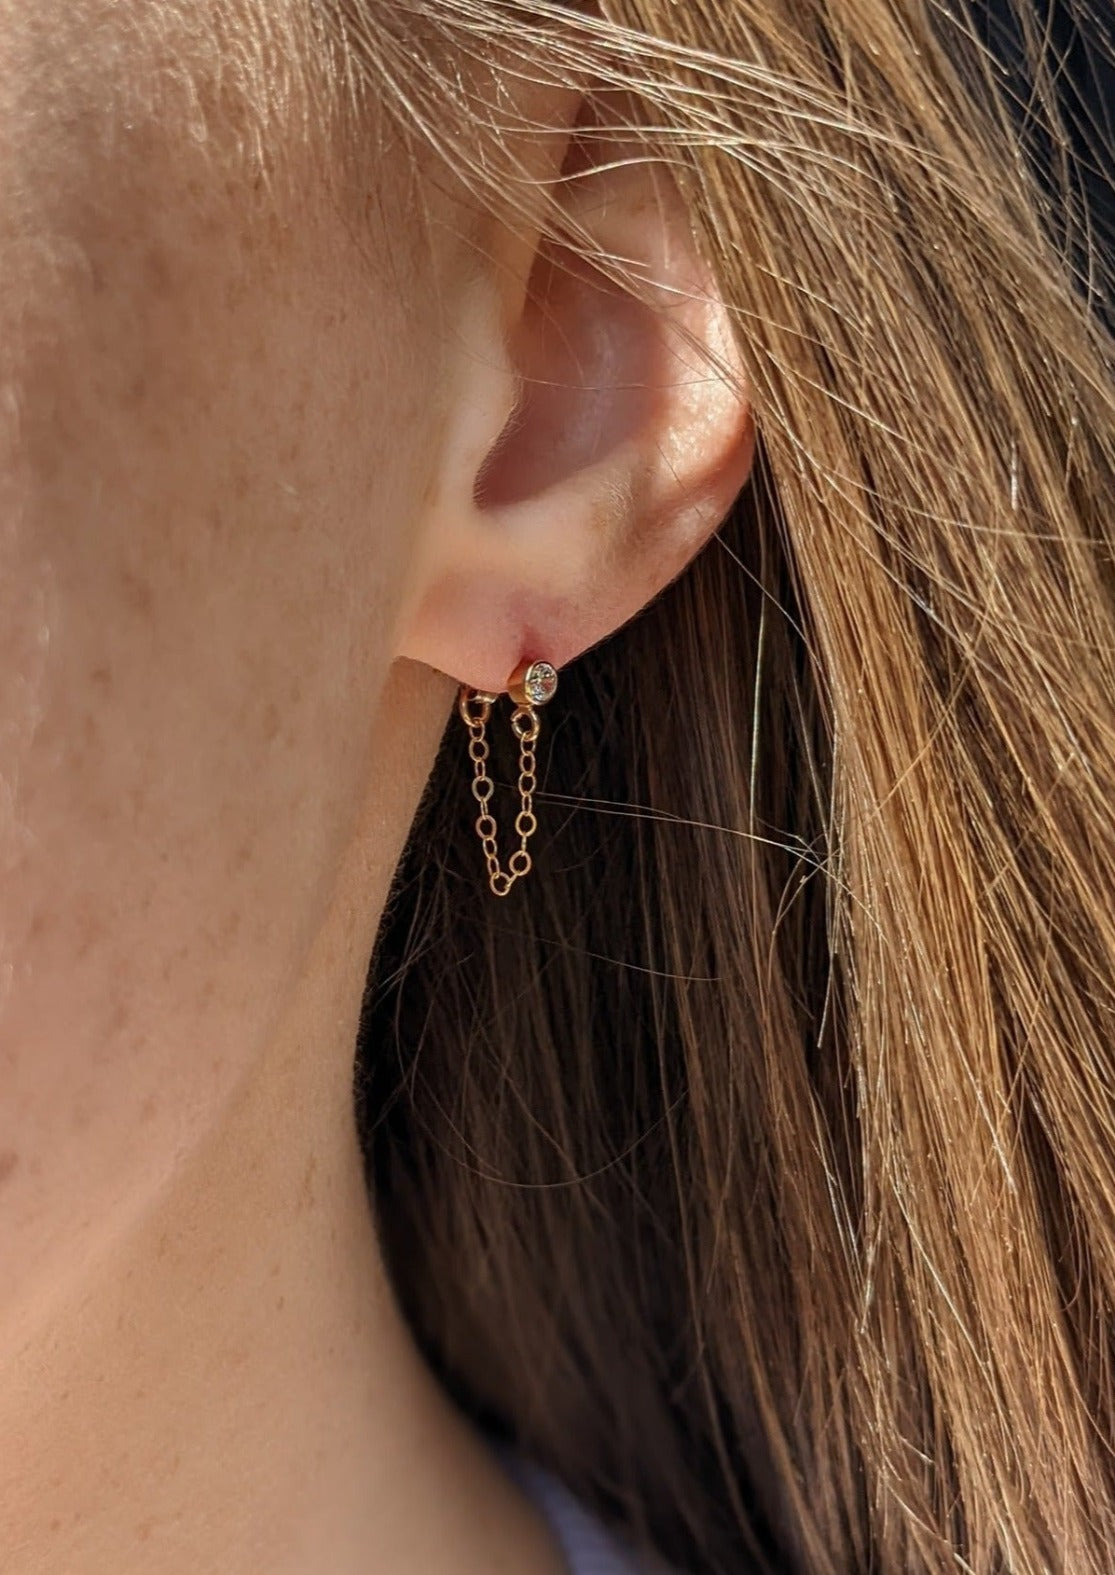 Elle Crystal Chain Studs by Layer the Love